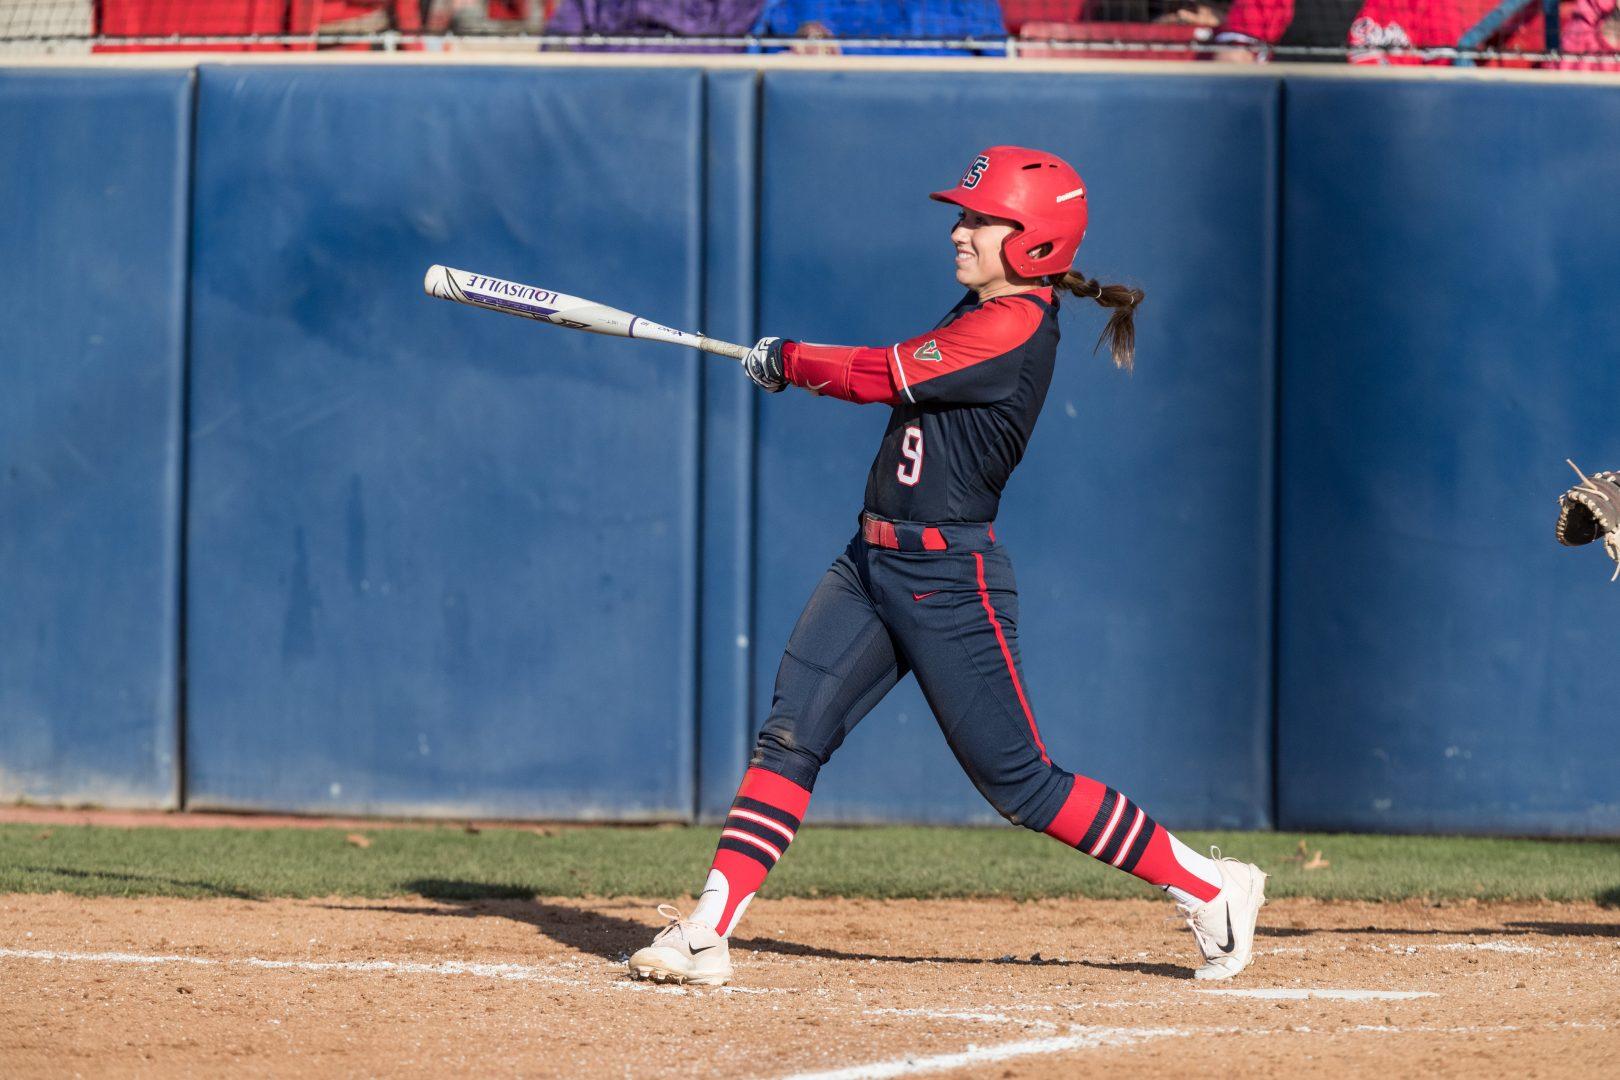 Kansas+native+and+second+baseman+Miranda+Rohleder+leads+the+Fresno+State+softball+team+with+43+runs+and+45+hits.+%28Fresno+State+Athletics%29+